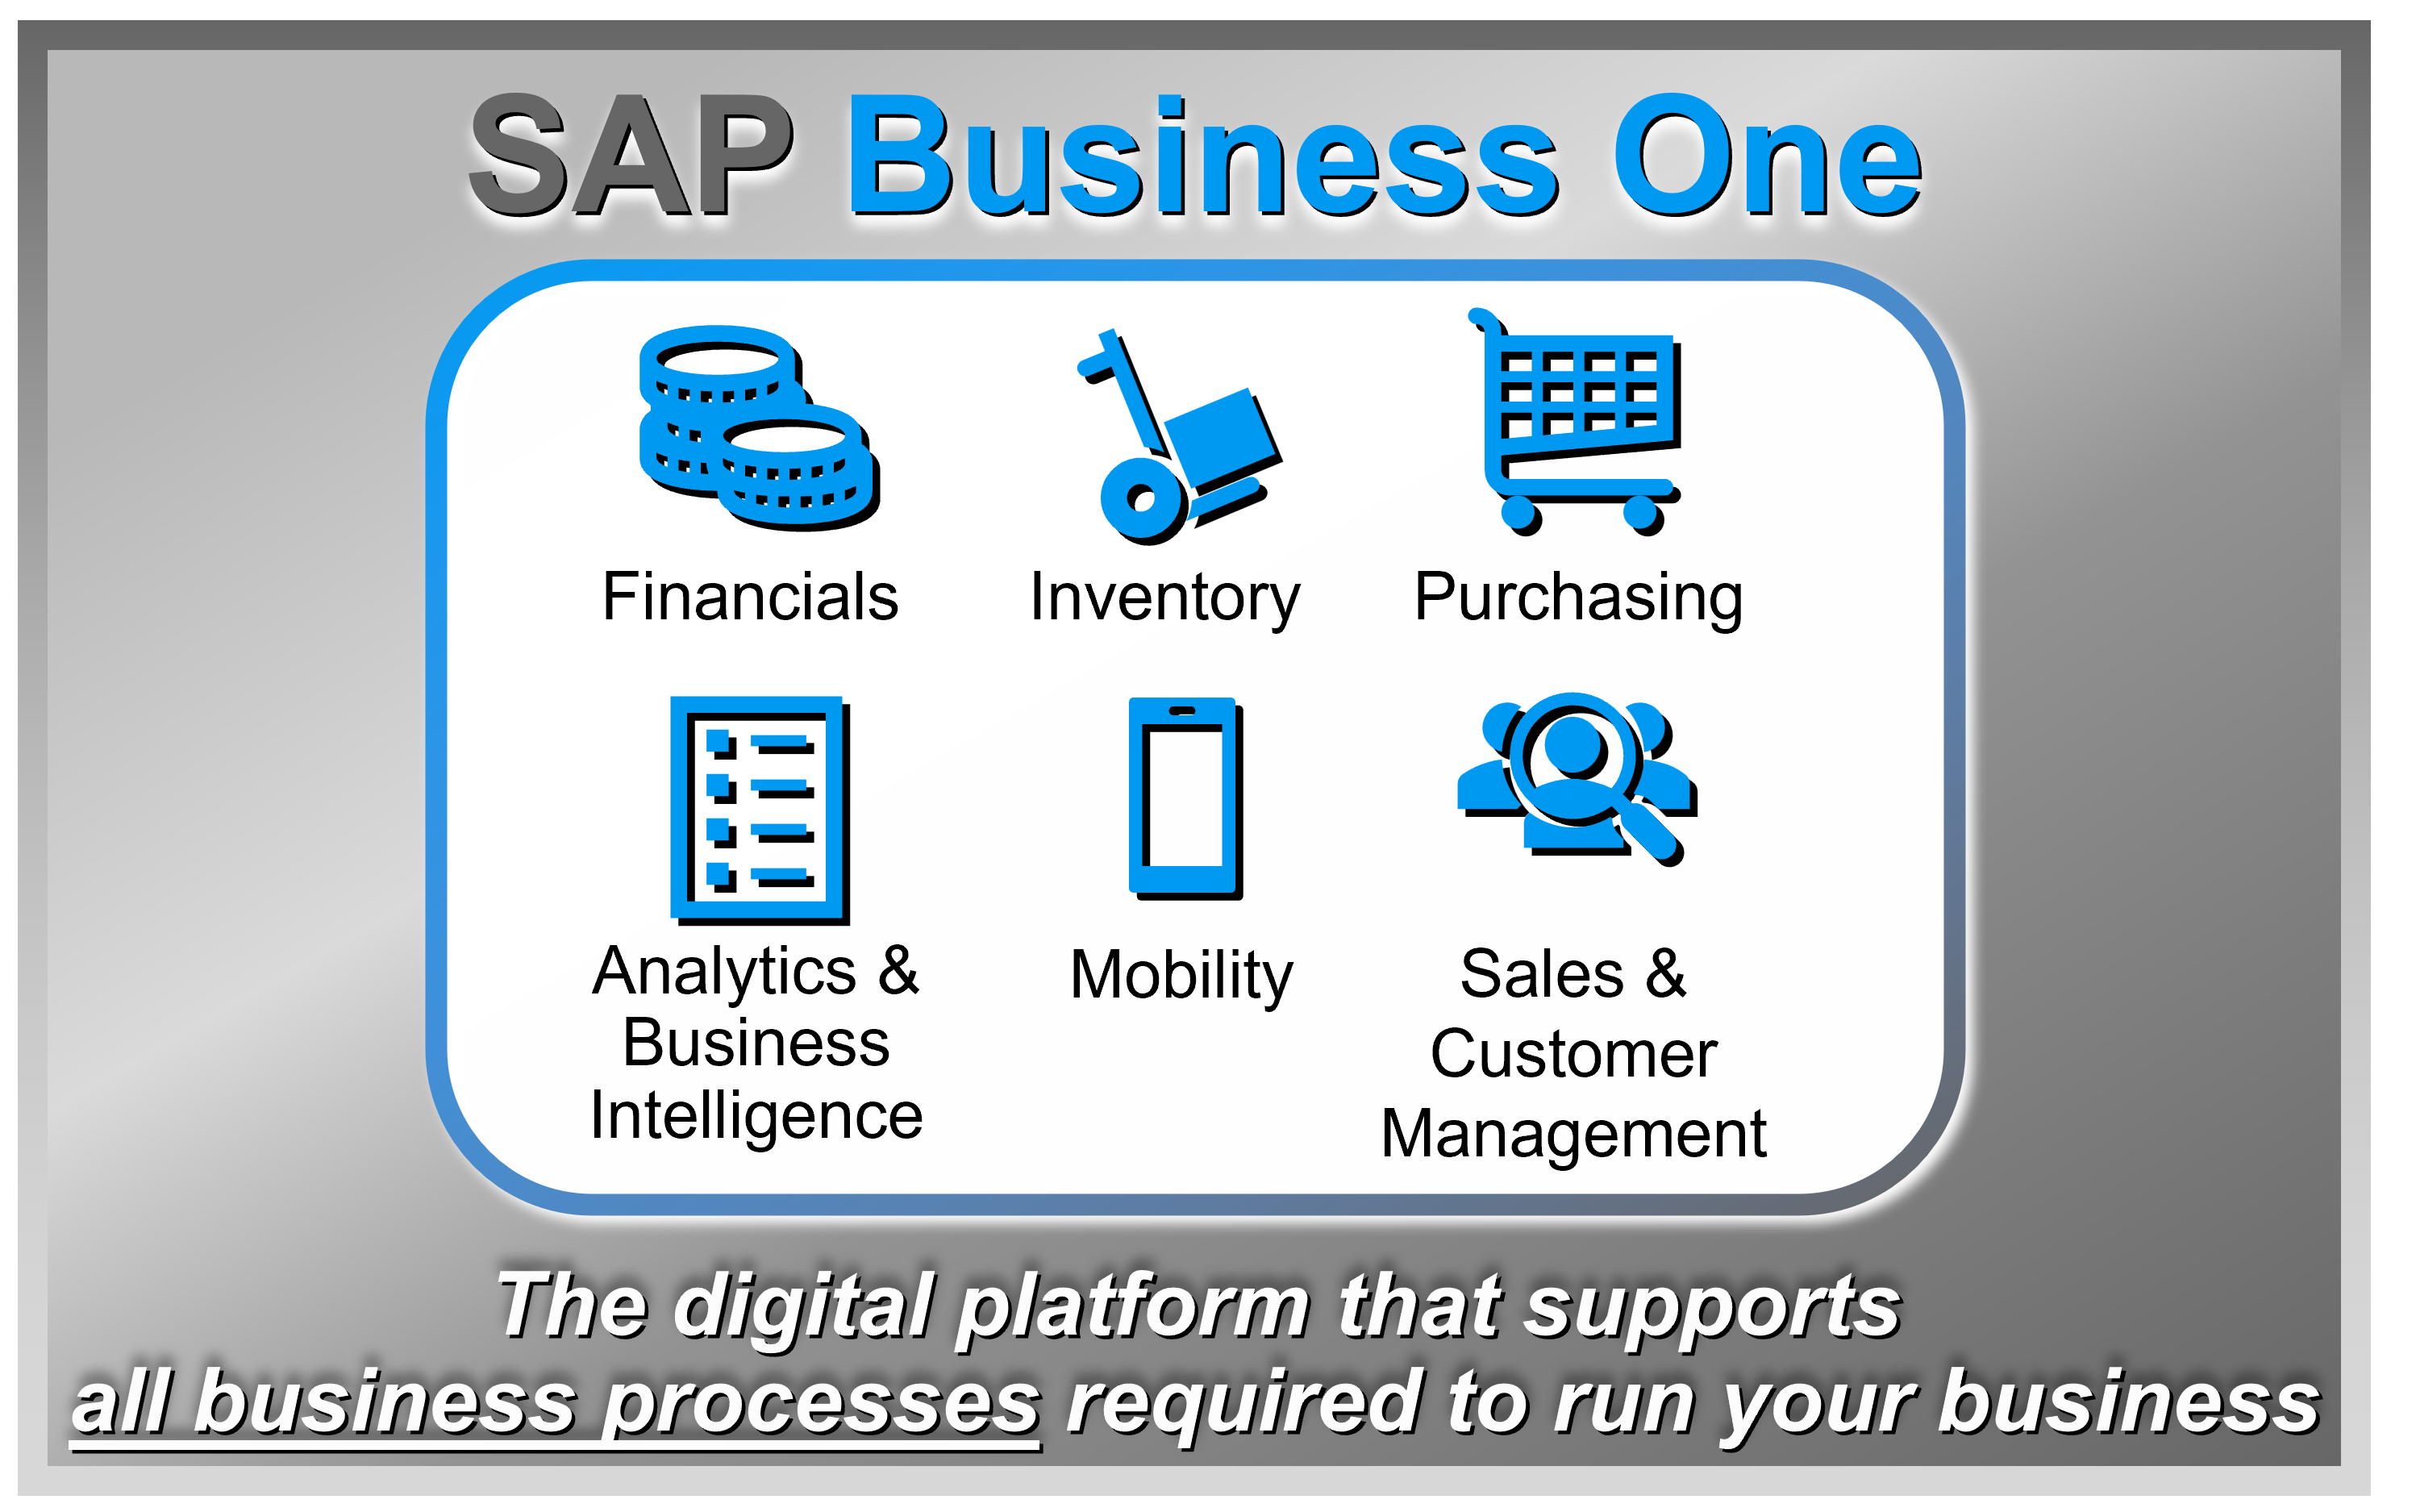 SAP Business One Core Business Processes Infographic